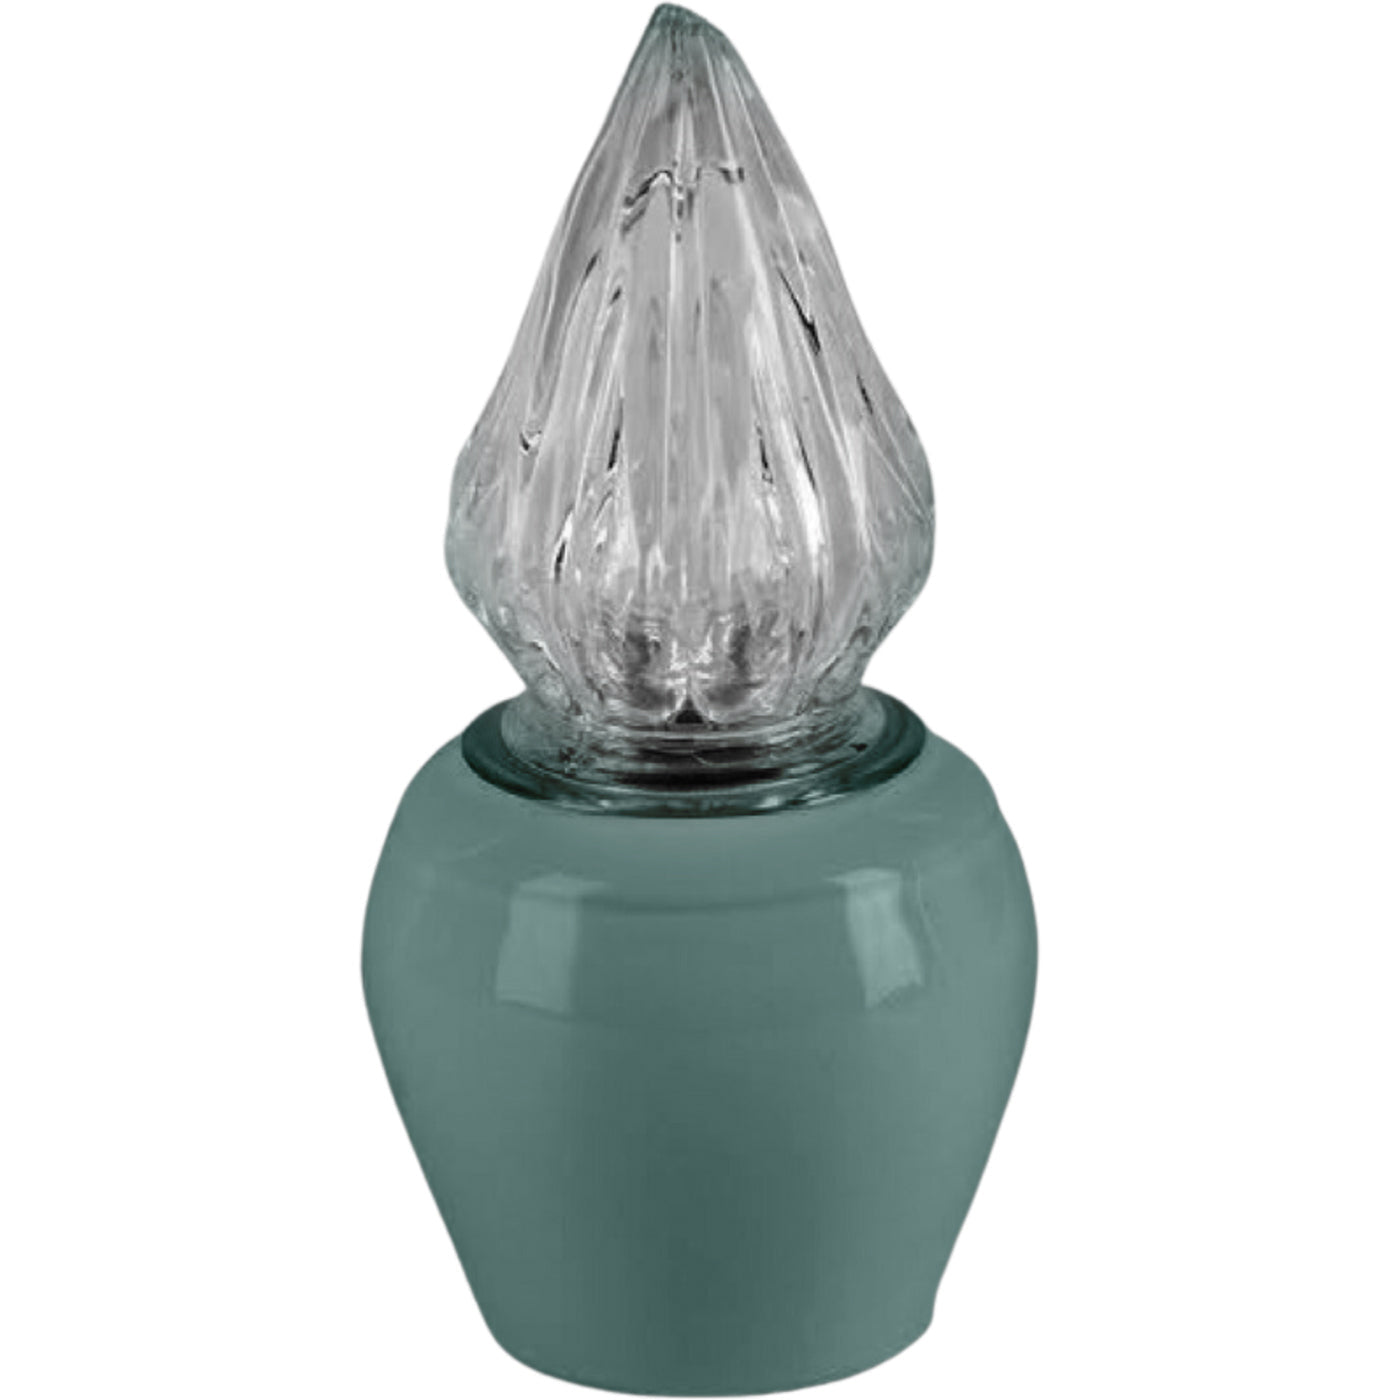 Grave light Liscia green 10x10cm - 3.9x3.9in In green porcelain, wall attached LI146P/V